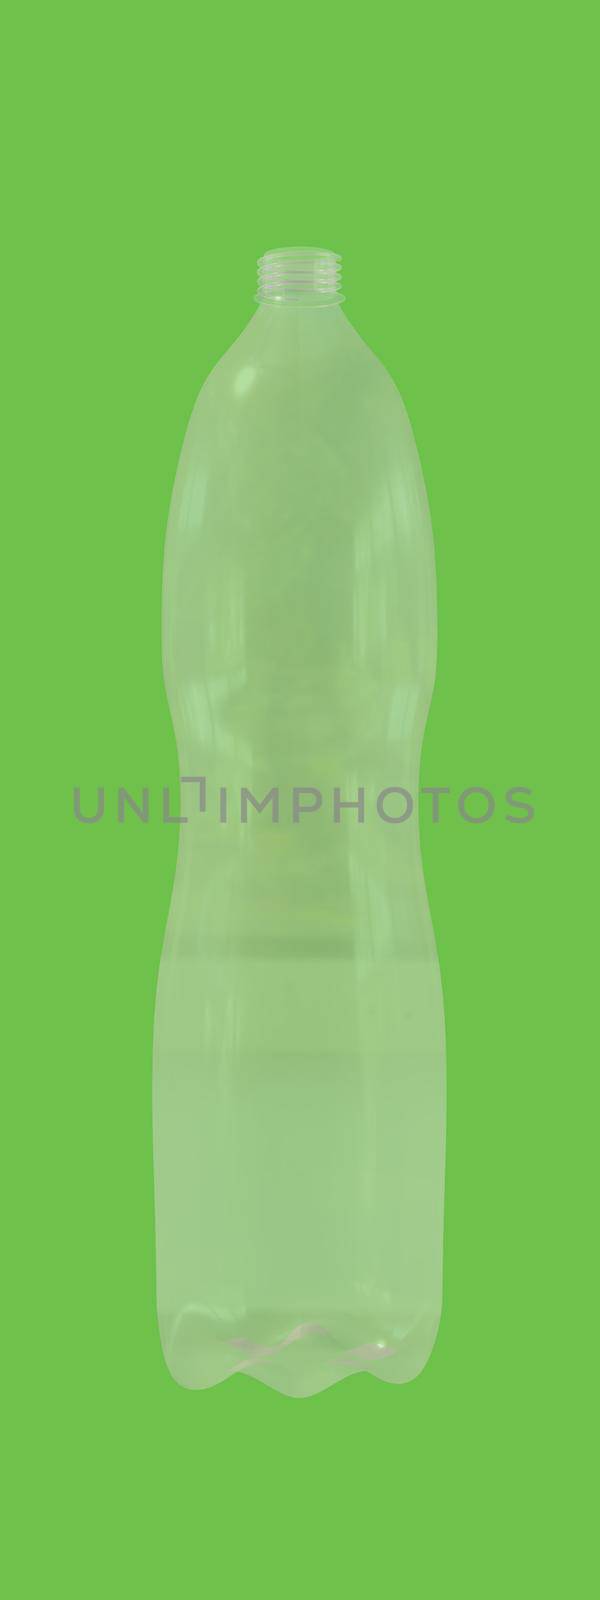 empty plastic bottle on green background 3d render by Dreamsachiever